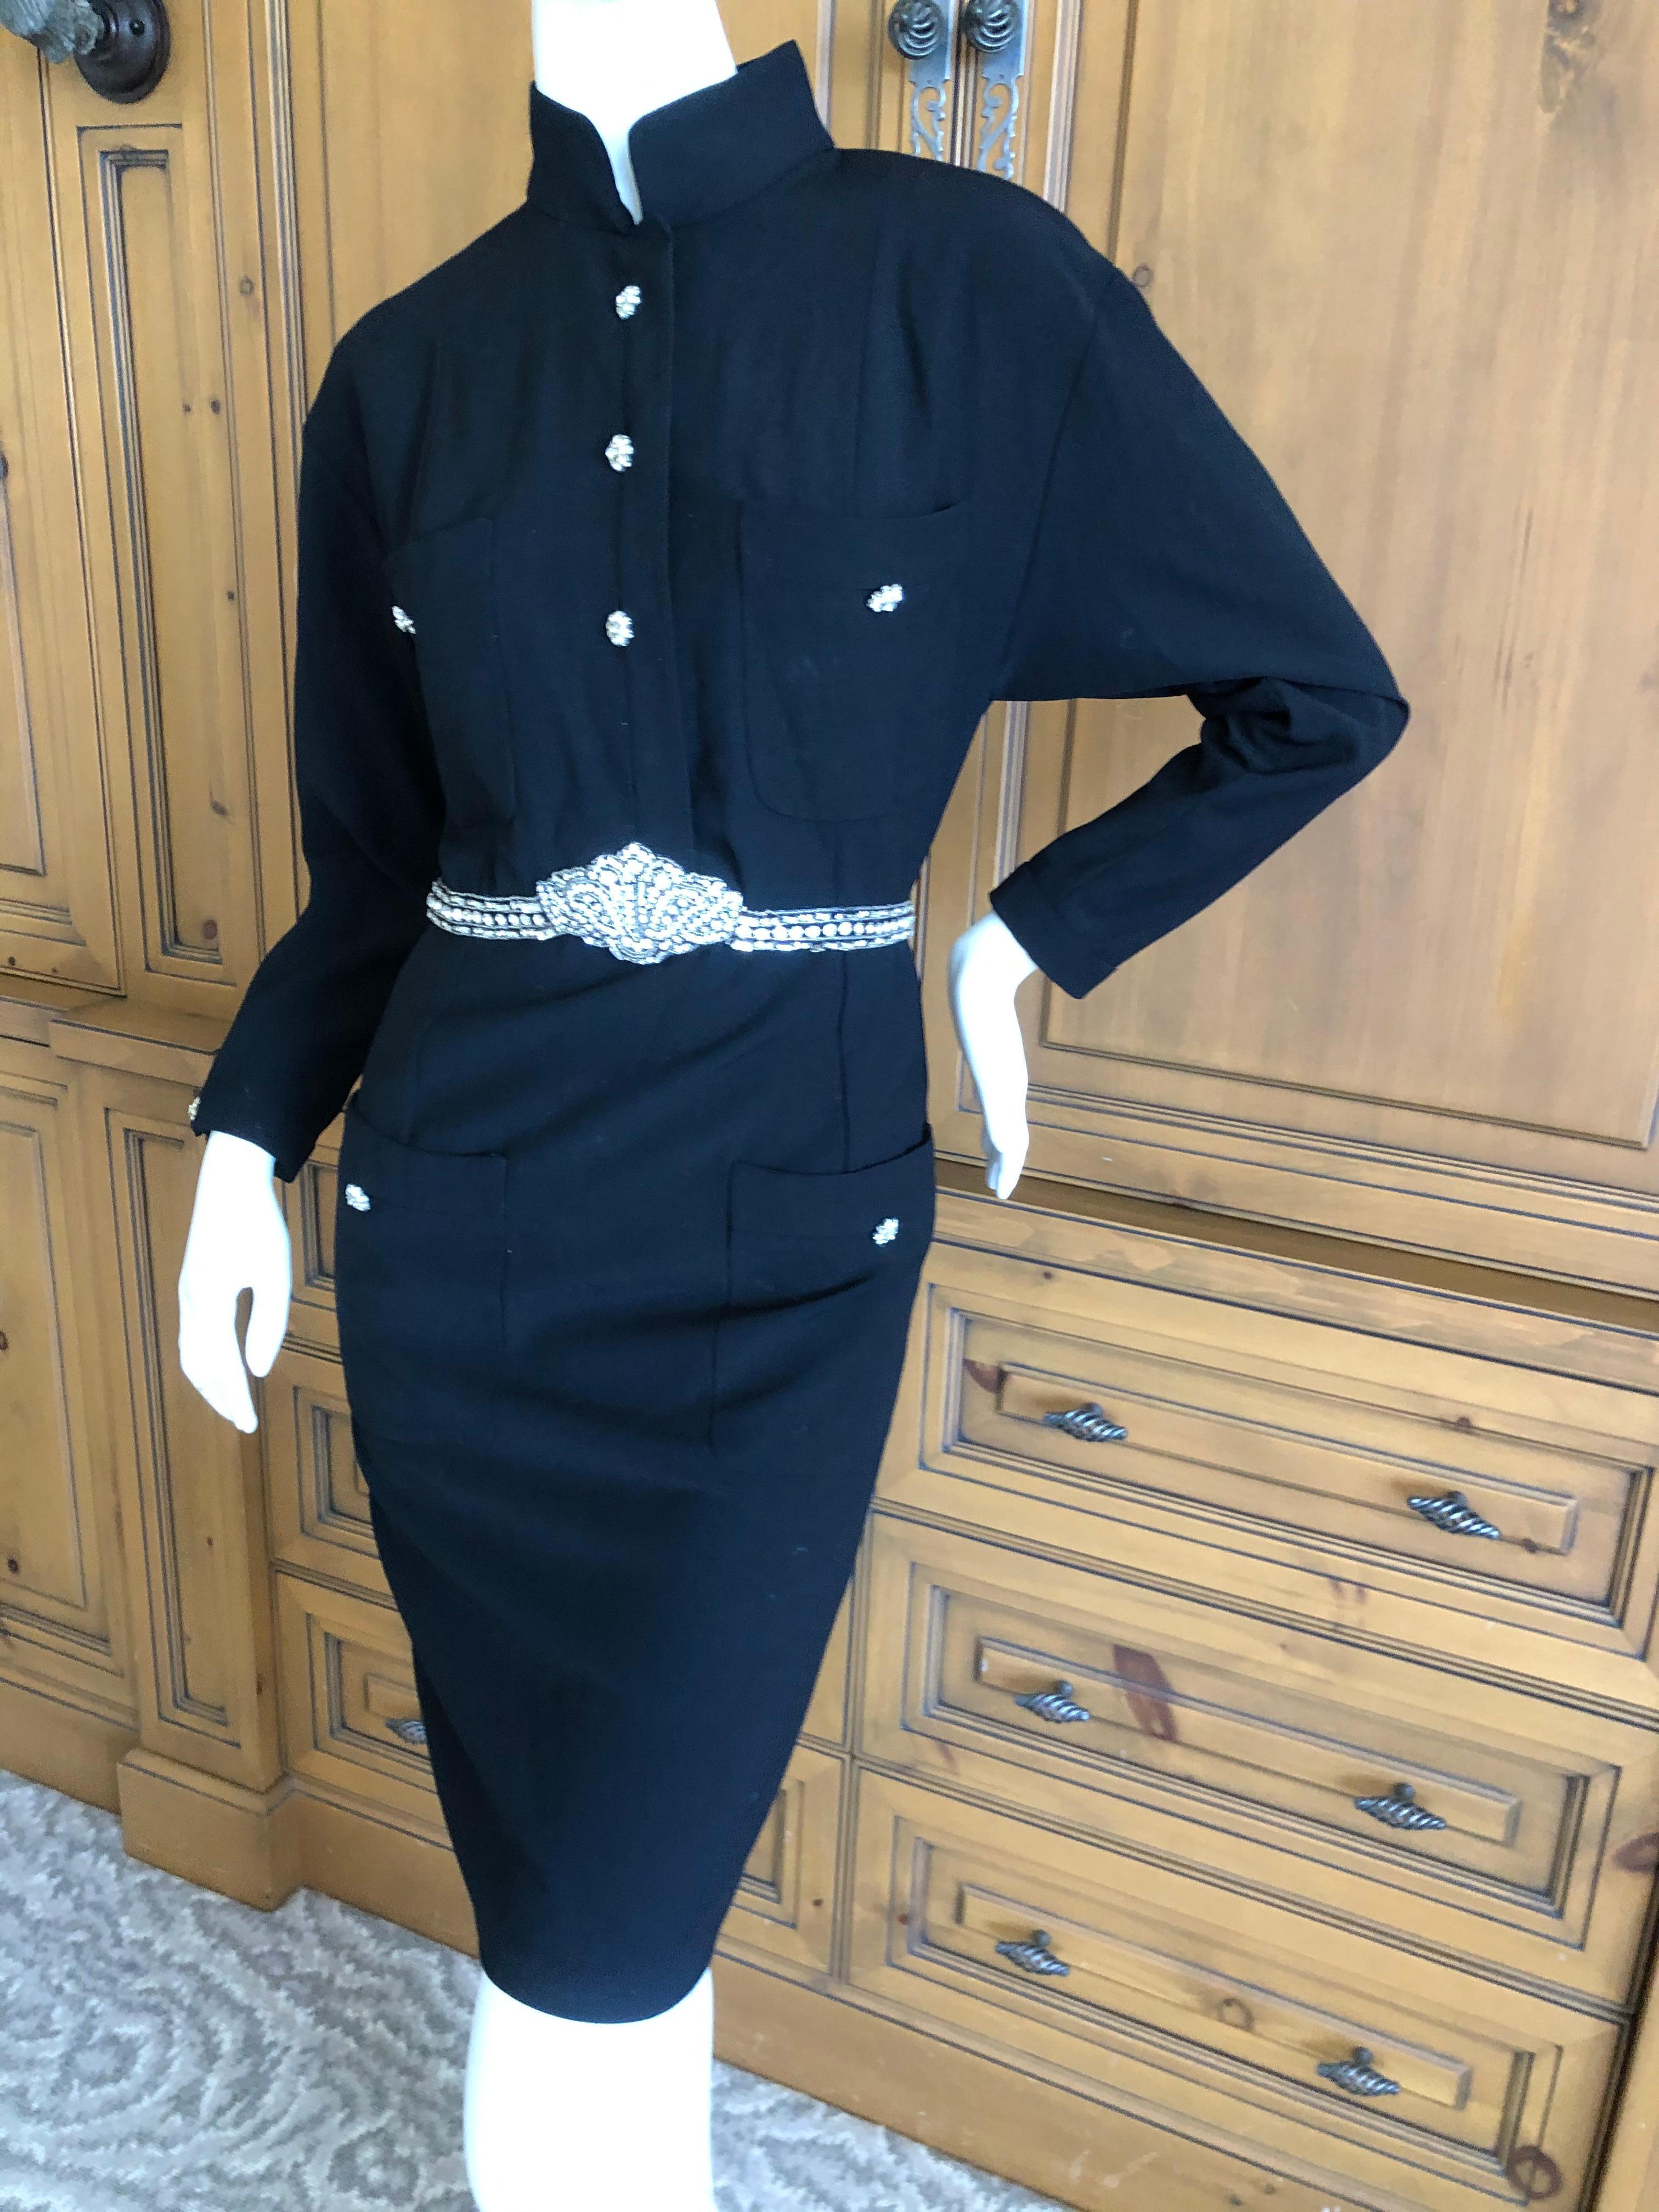 Chanel Vintage Military Style Little Black Dress with Maison Lesage Embellished Jewel Belt.
Beautiful cast crystal buttons are ornamental, there is a zipper up the back.
The tromp l'oeil belt is a superb example of Masion Lesage's excellence. It is